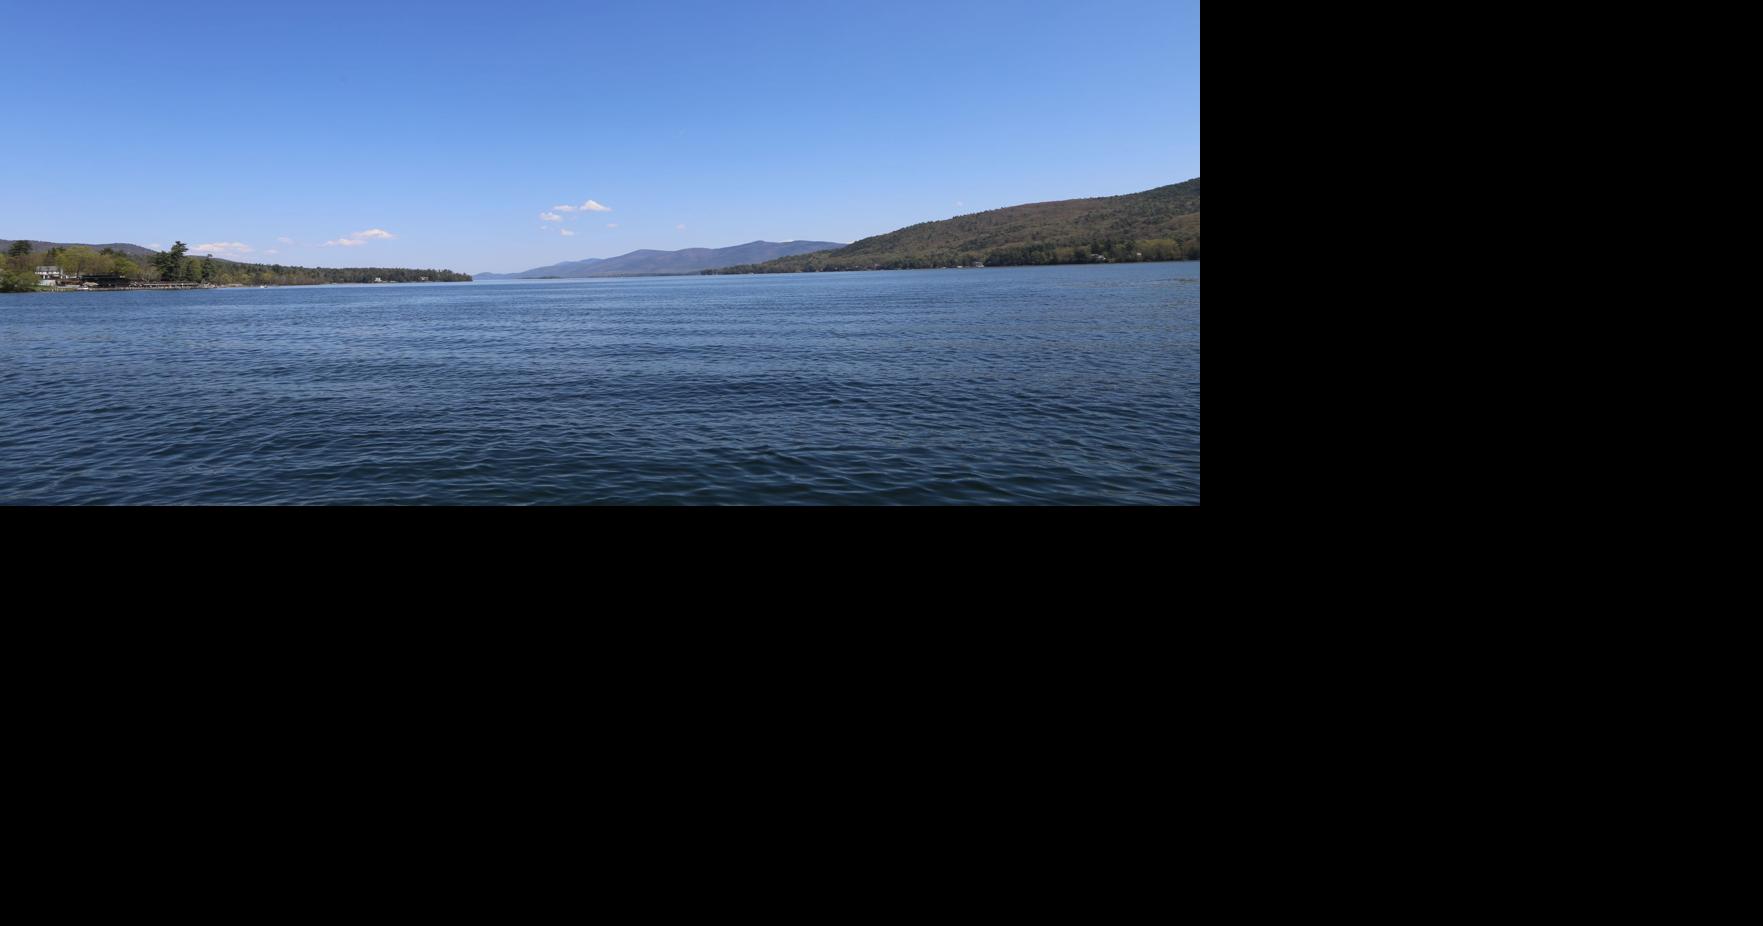 Learn about Lake Schroon Lake at meetings